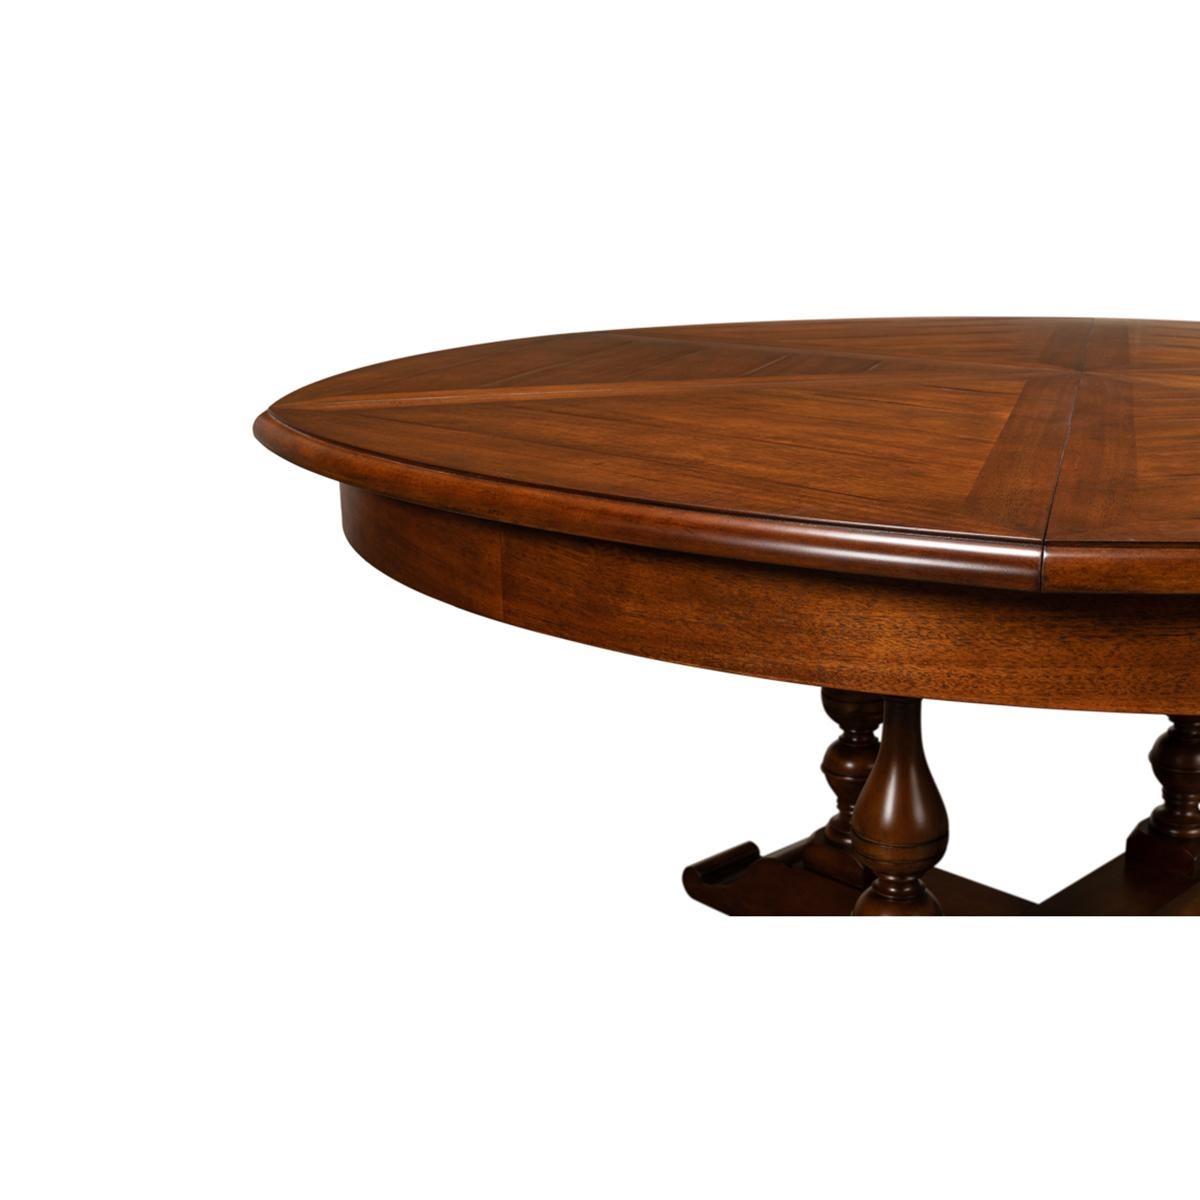 Early English Style Round Extension Dining Table - 84